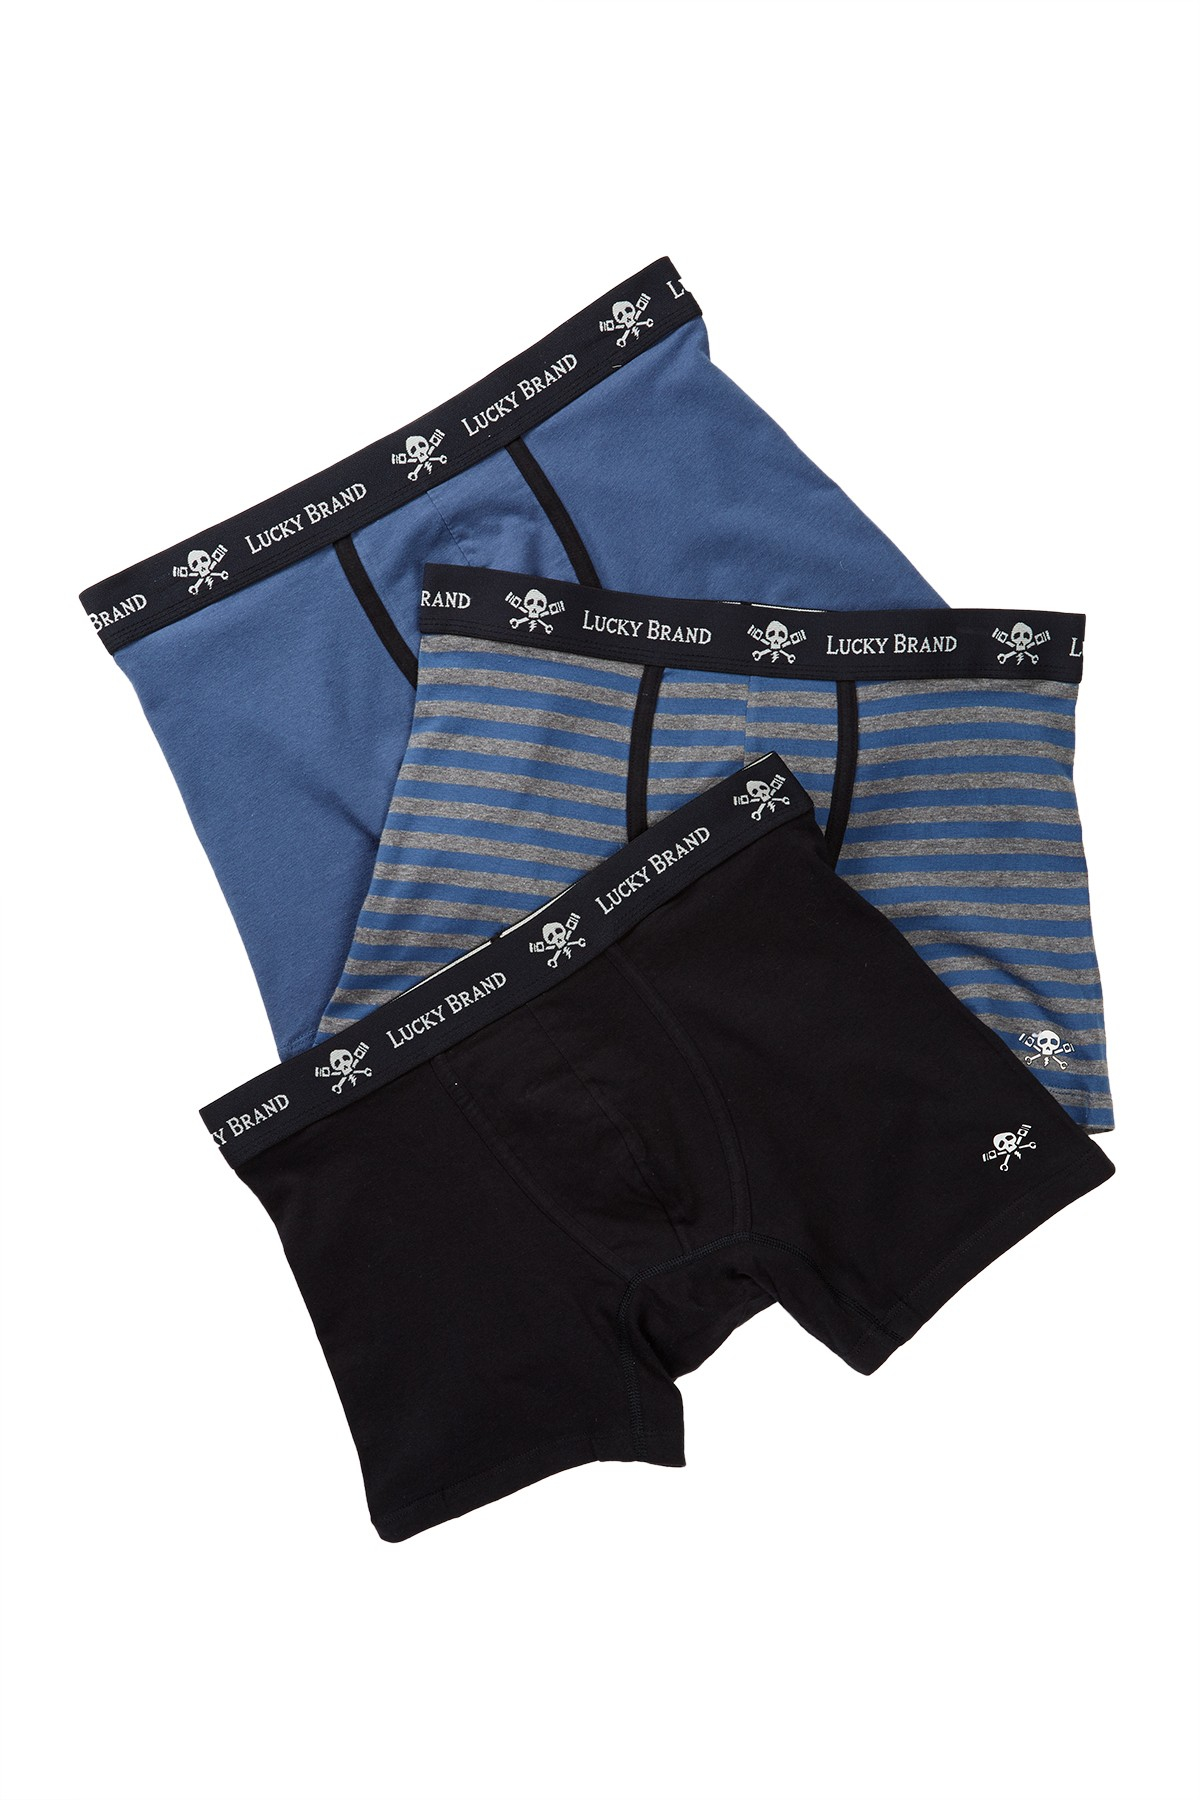 Lucky Brand Black Label Boxer Brief - Pack Of 3 in Blue for Men